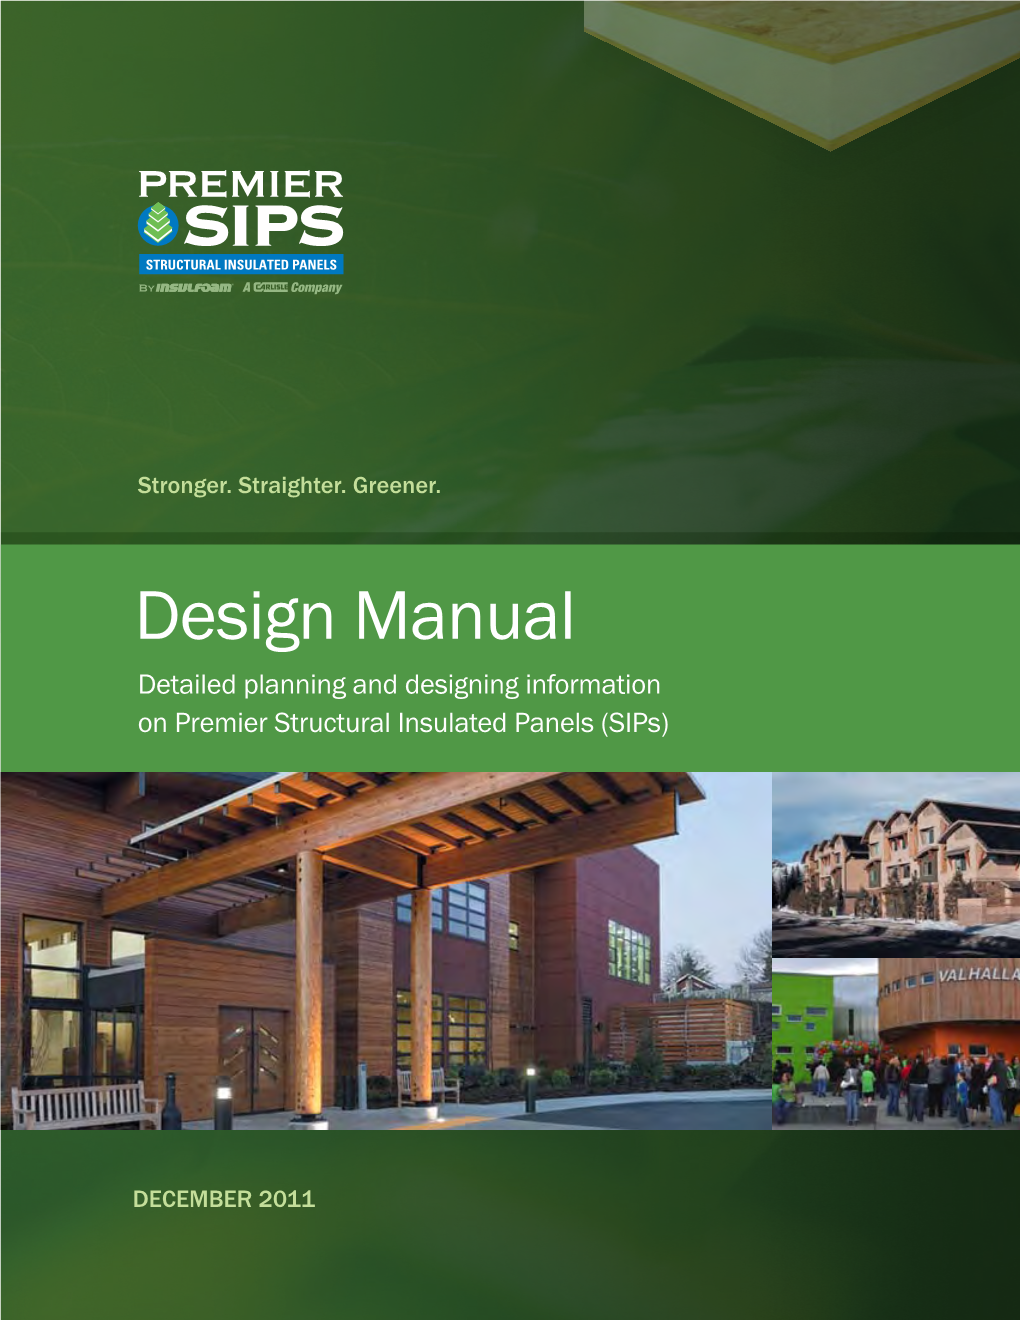 Design Manual Detailed Planning and Designing Information on Premier Structural Insulated Panels (Sips)